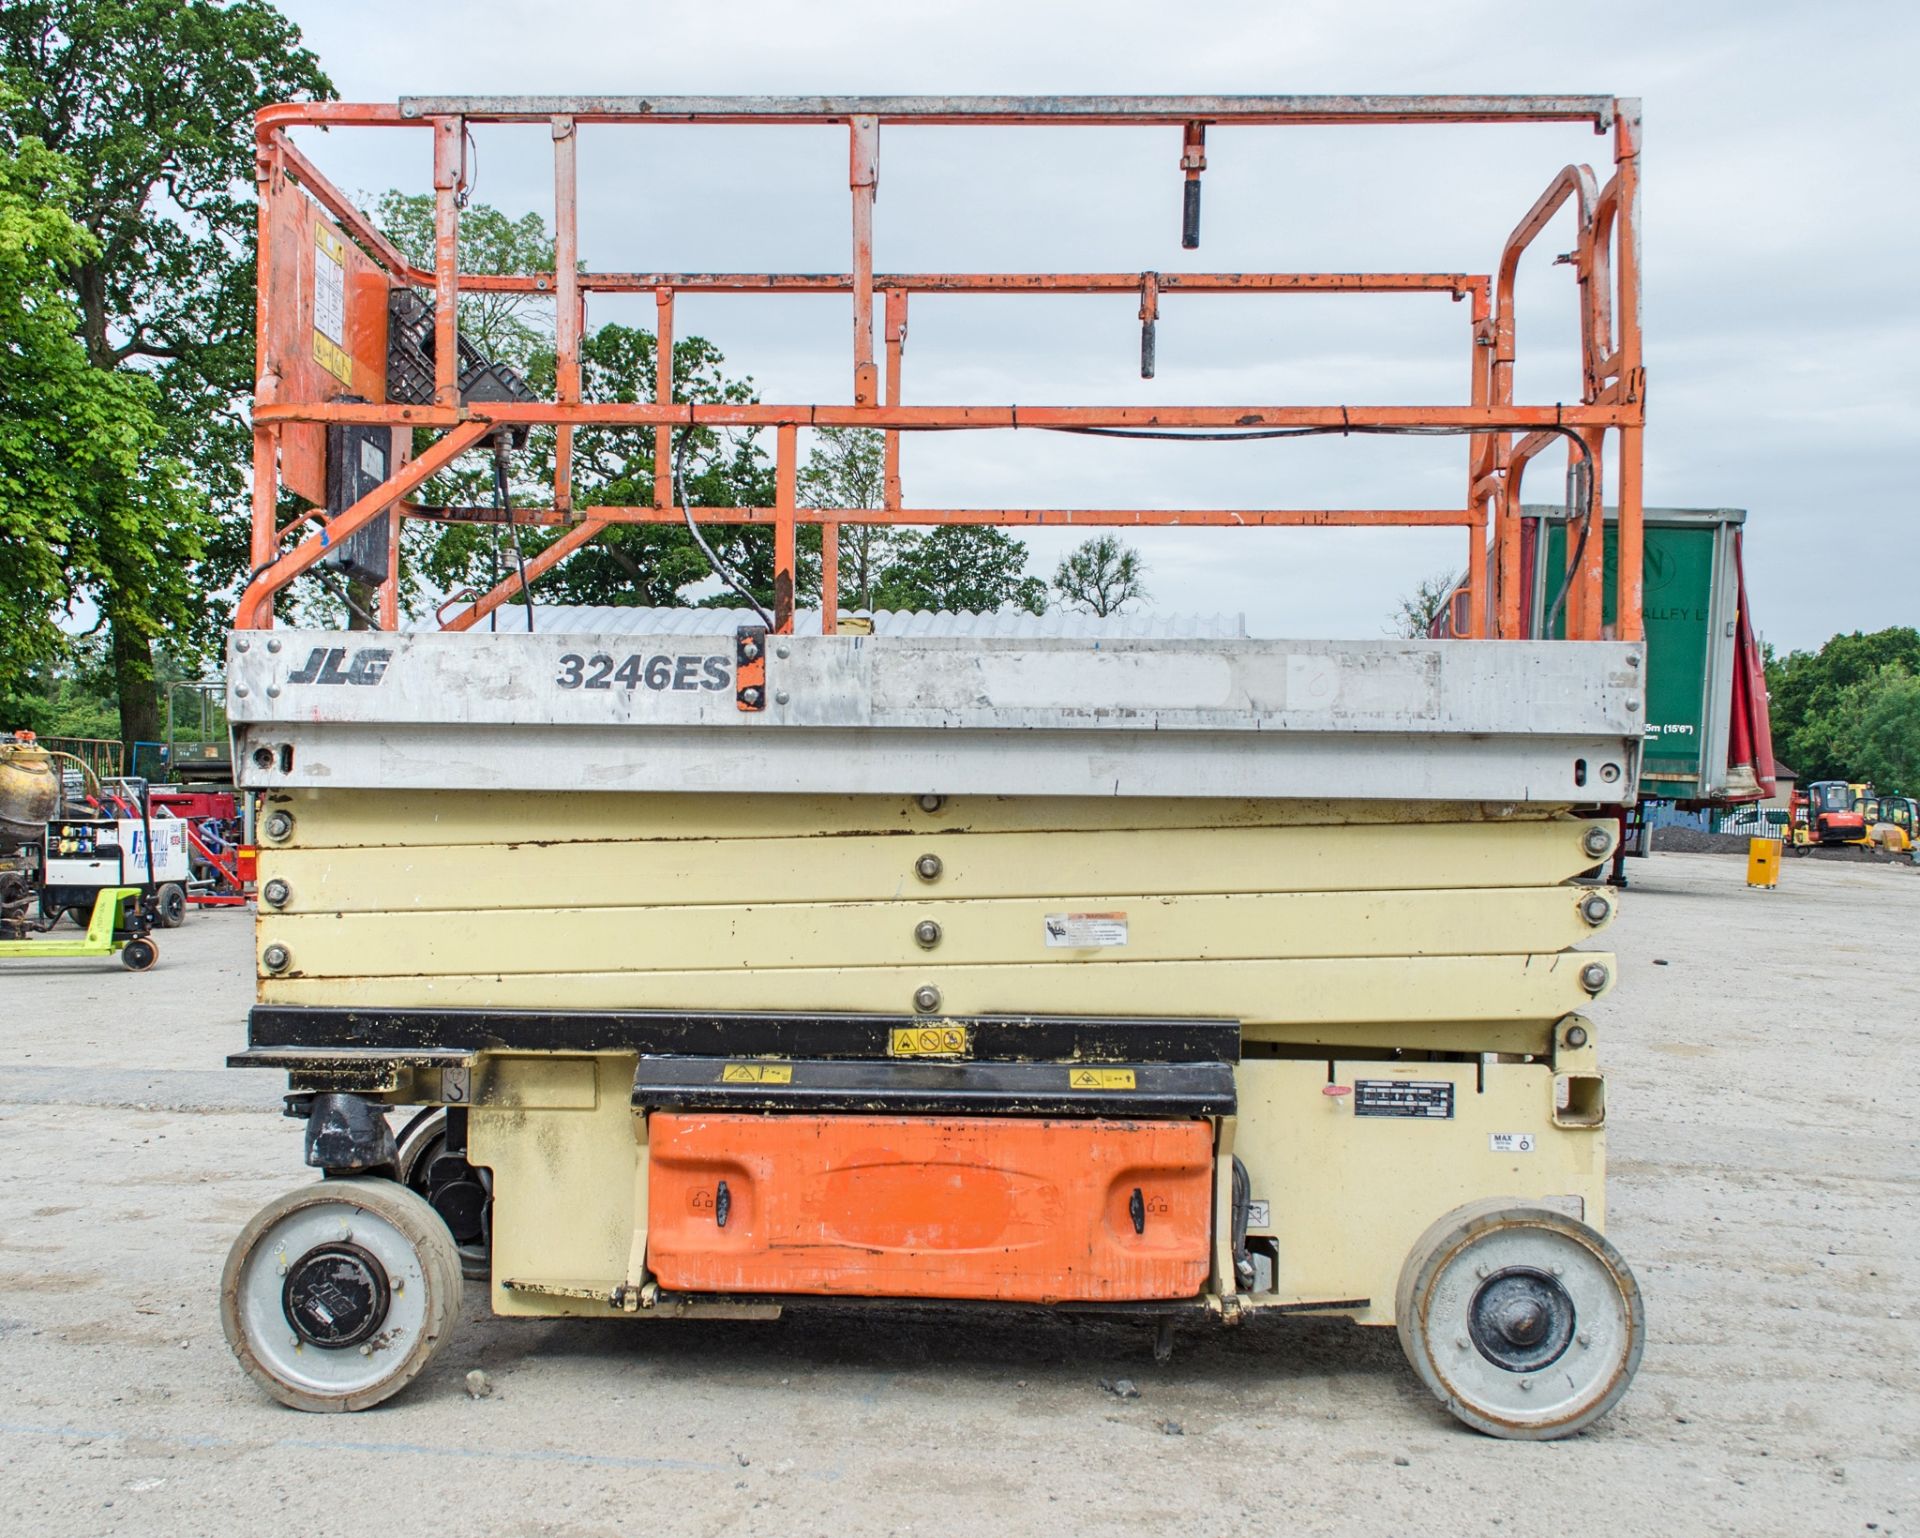 JLG 3246 ES battery electric scissor lift Year: 2006 S/N: 1200007929 Recorded hours: 467 HYP070 - Image 6 of 9